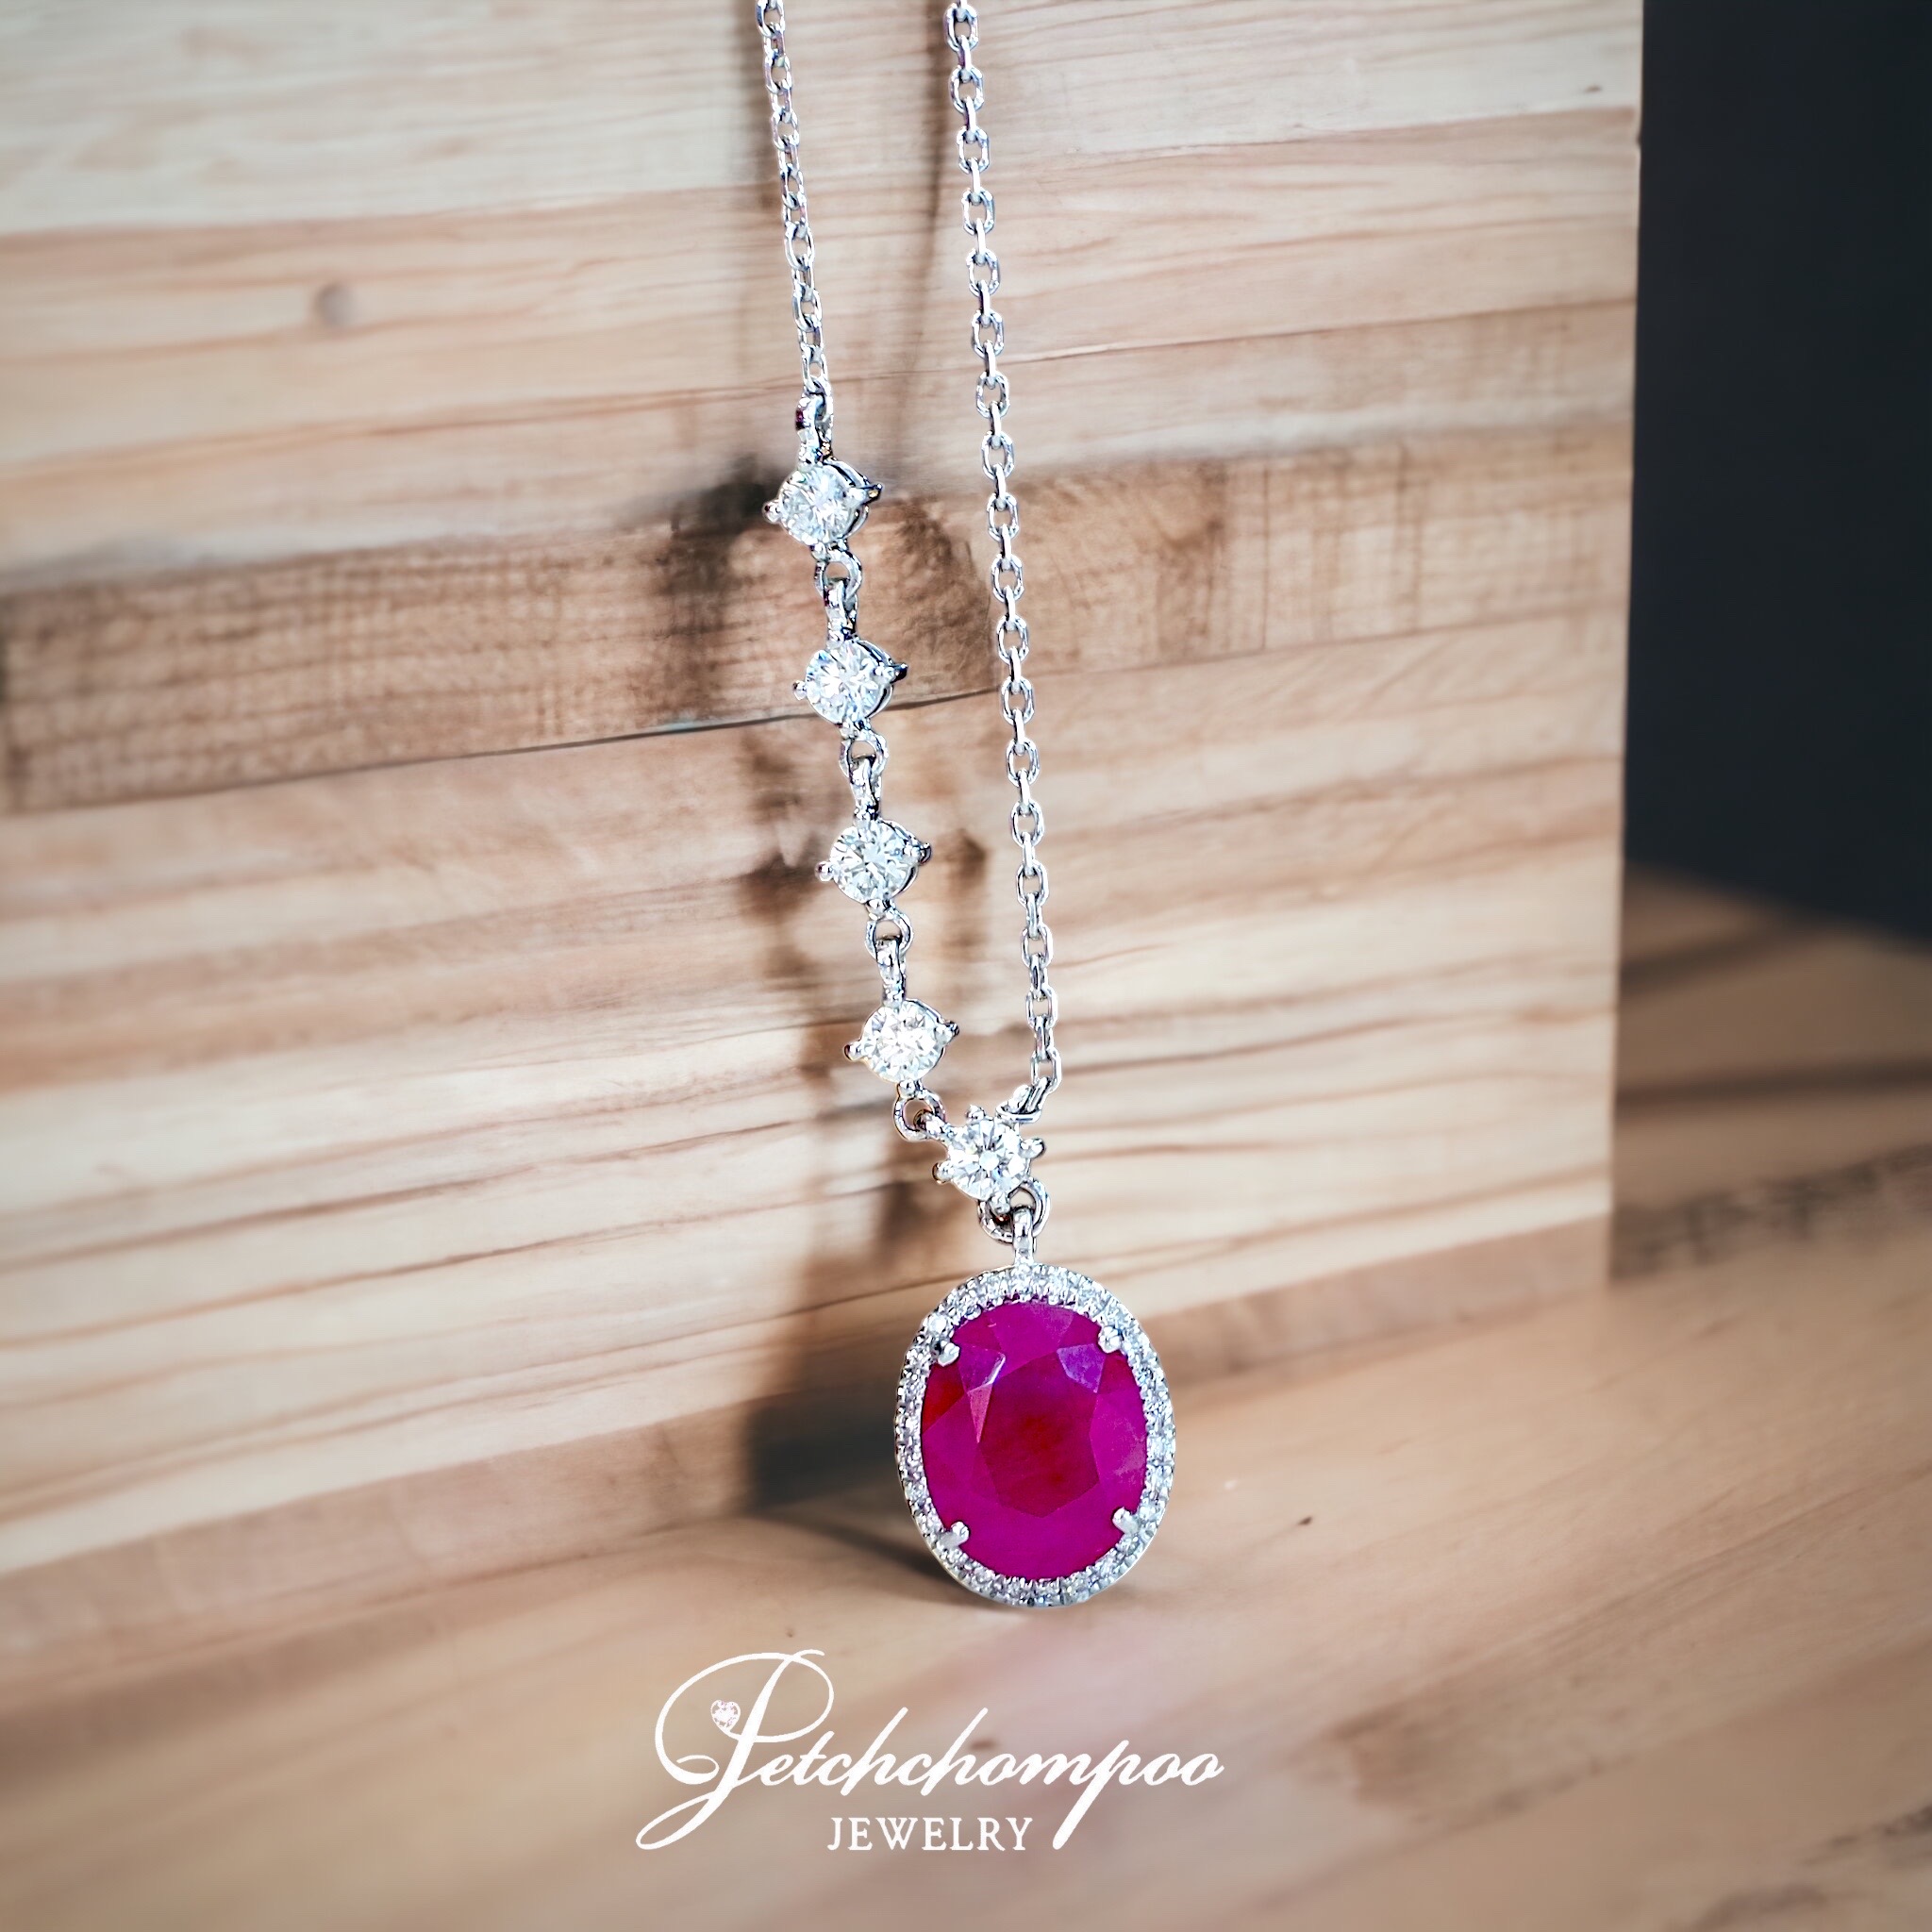 [27801] Diamond necklace with Burmese ruby pendant 4.27 ct. Discount 69,000